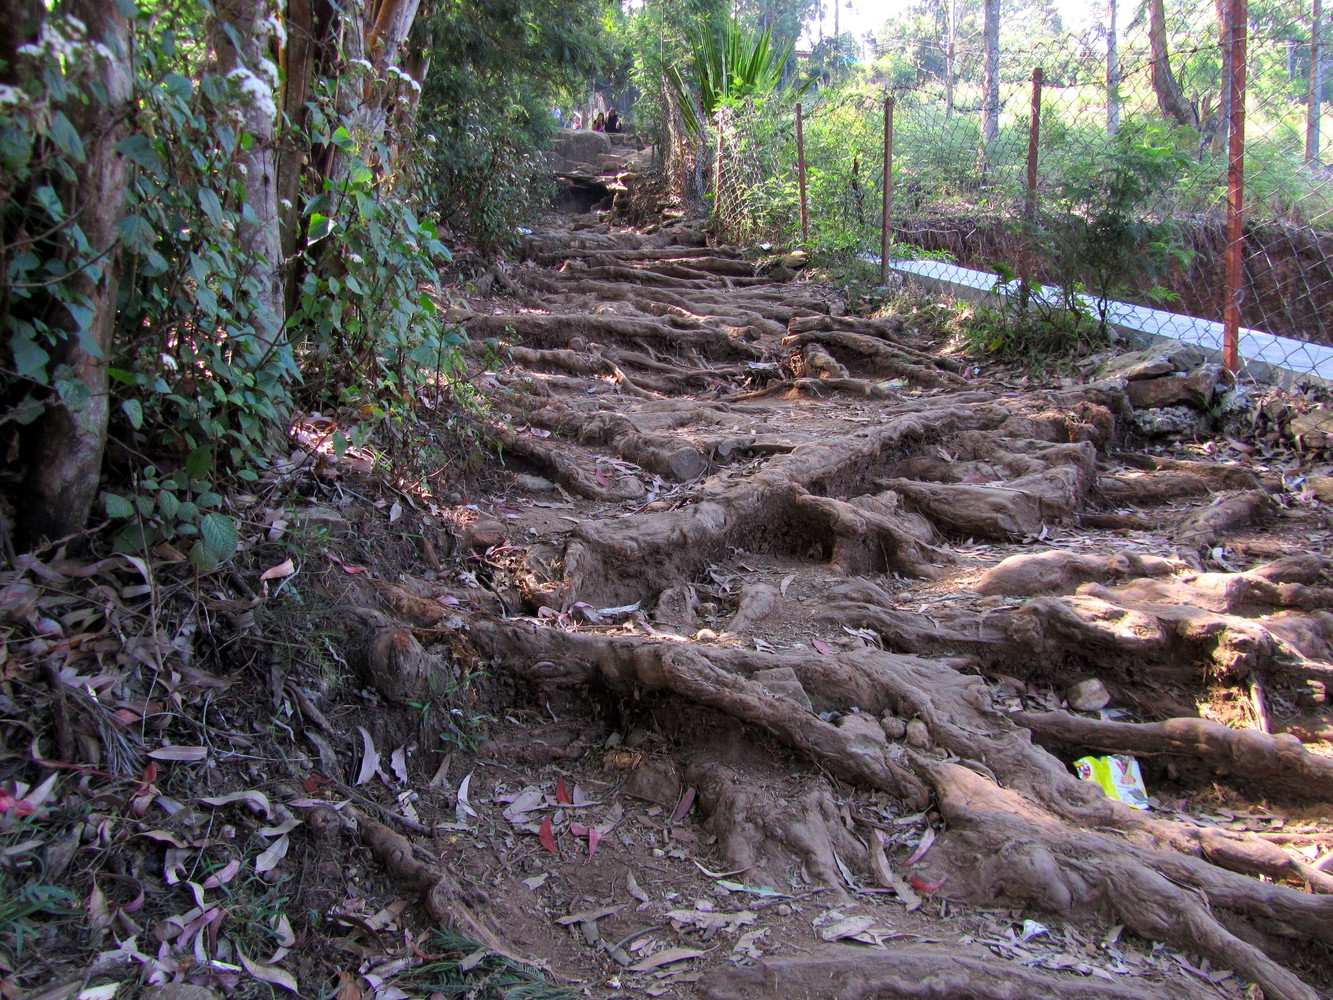 A network of roots of trees that form a natural staircase